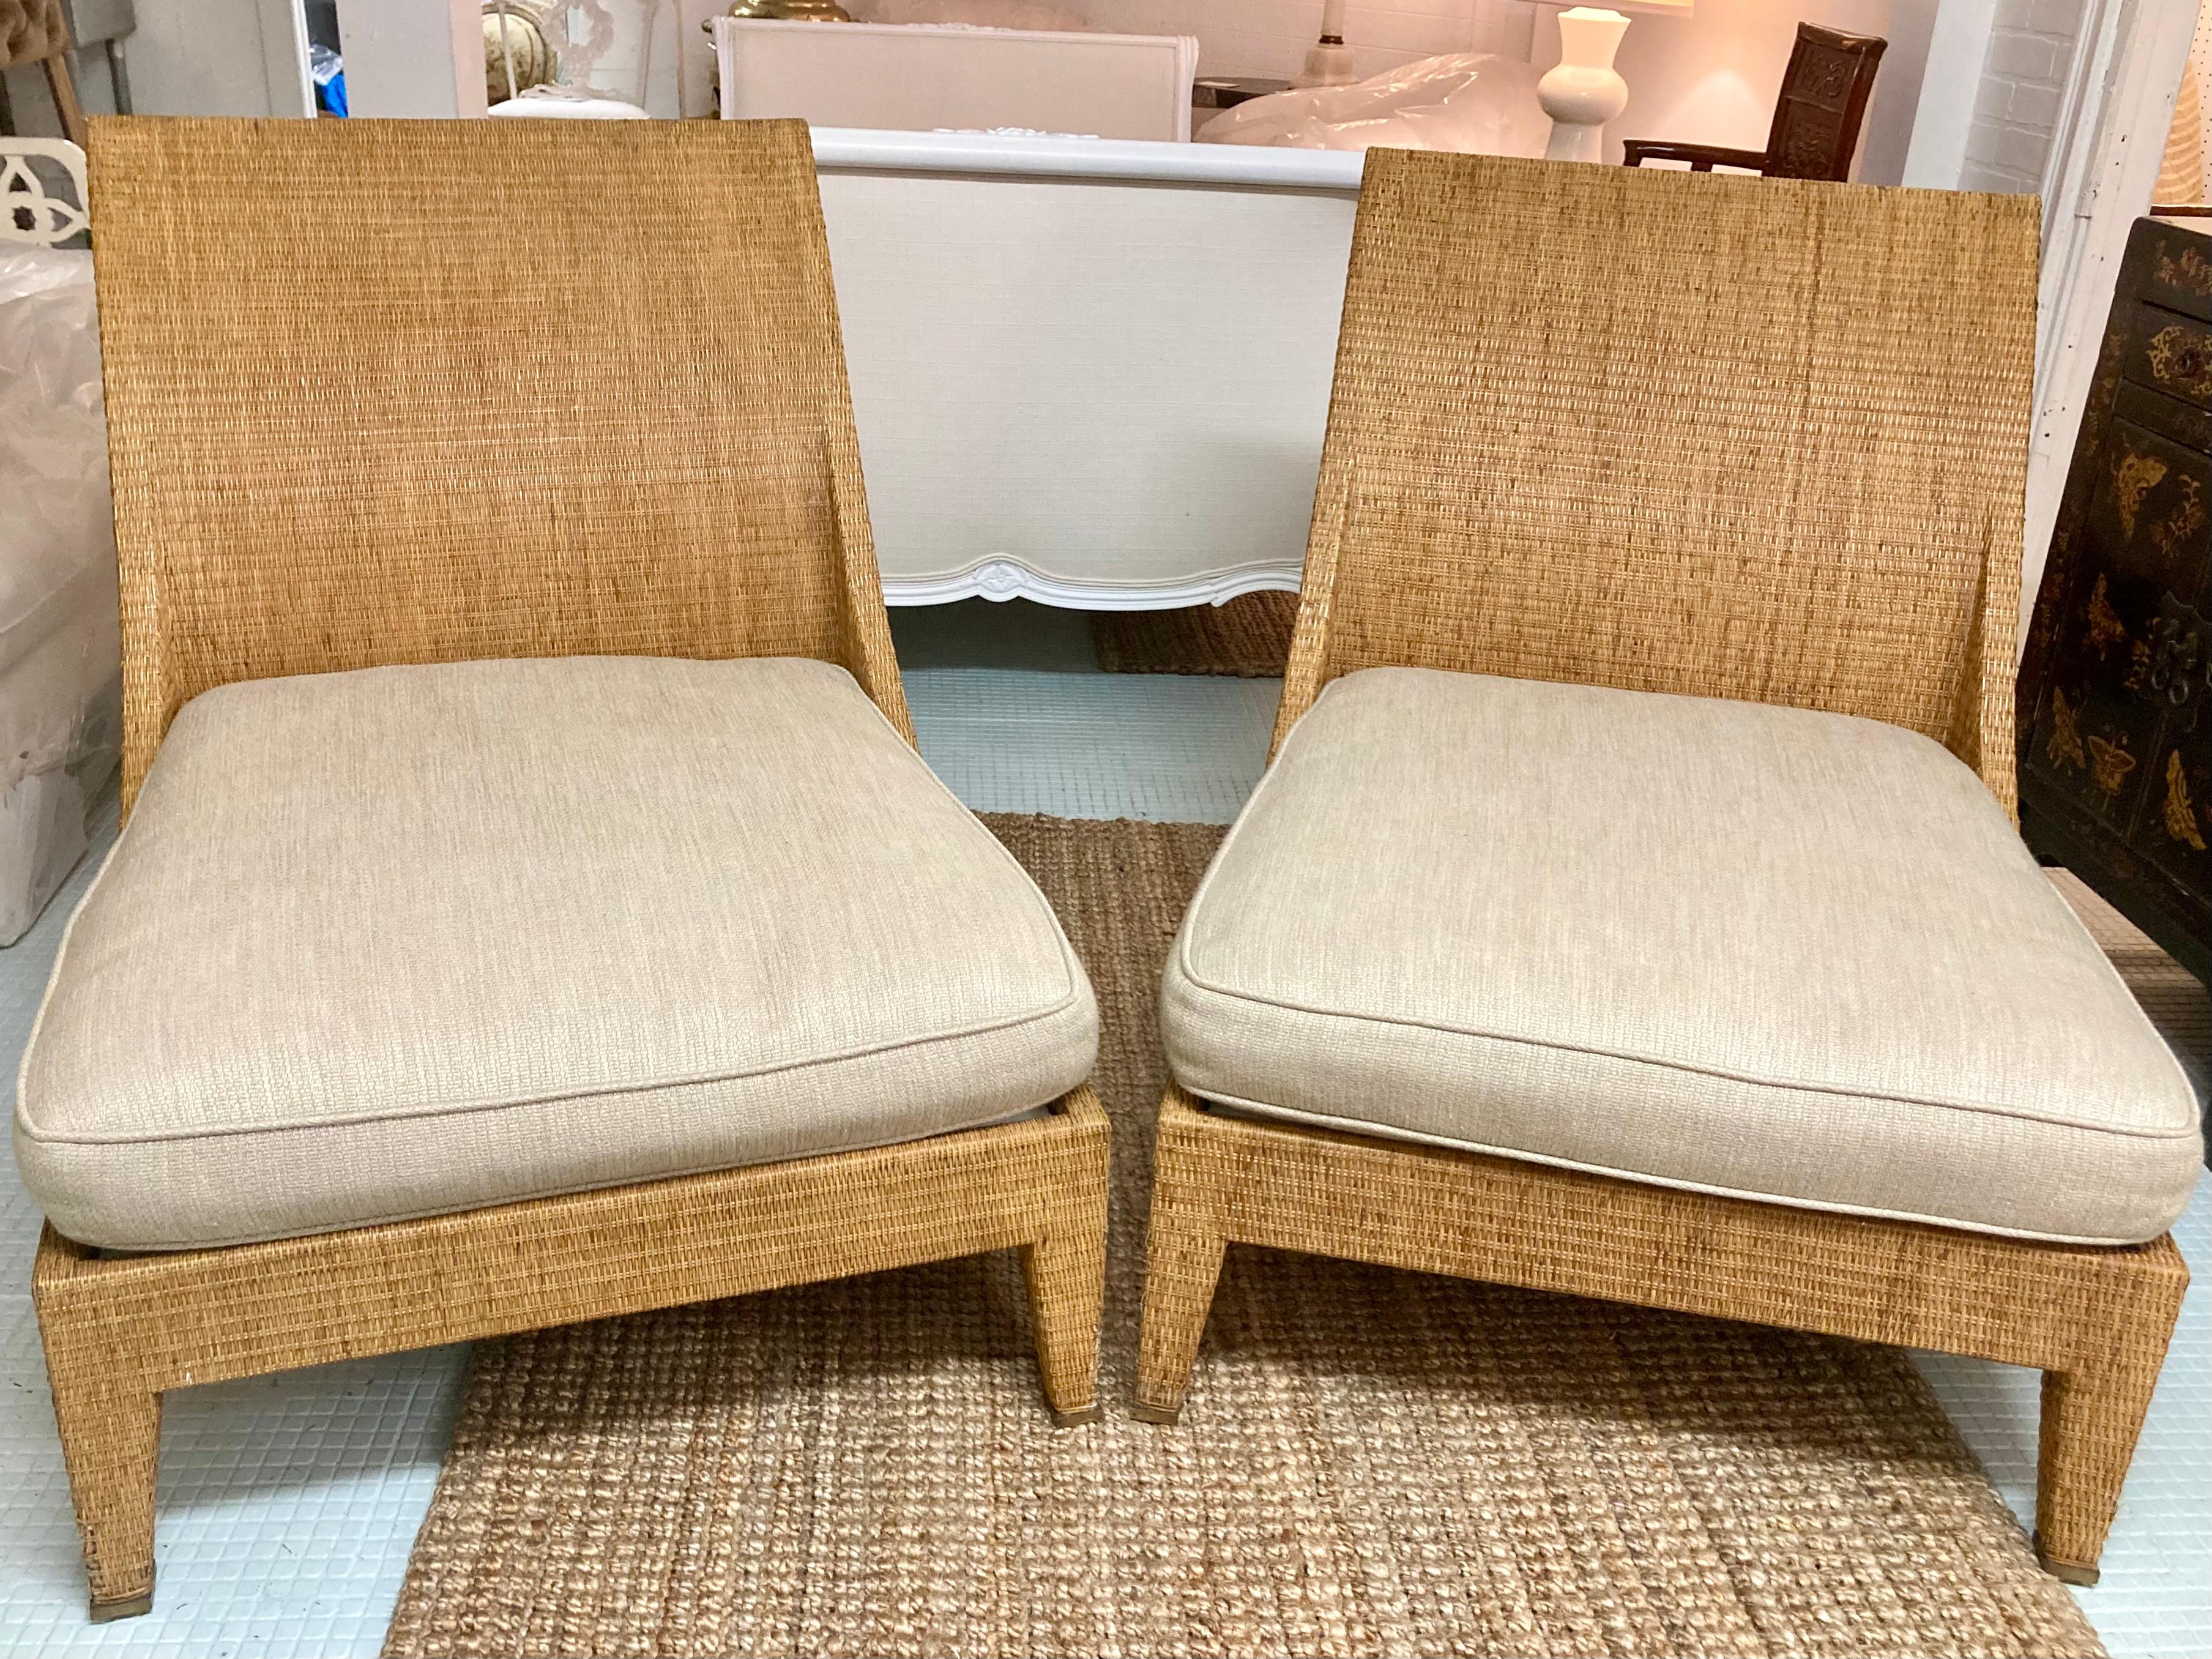 Beautiful pair of Jacques Garcia for McGuire woven raffia large club chairs. Great addition to your Boho Chic inspired interiors. McGuire seal on chairs, see pictures for detail.